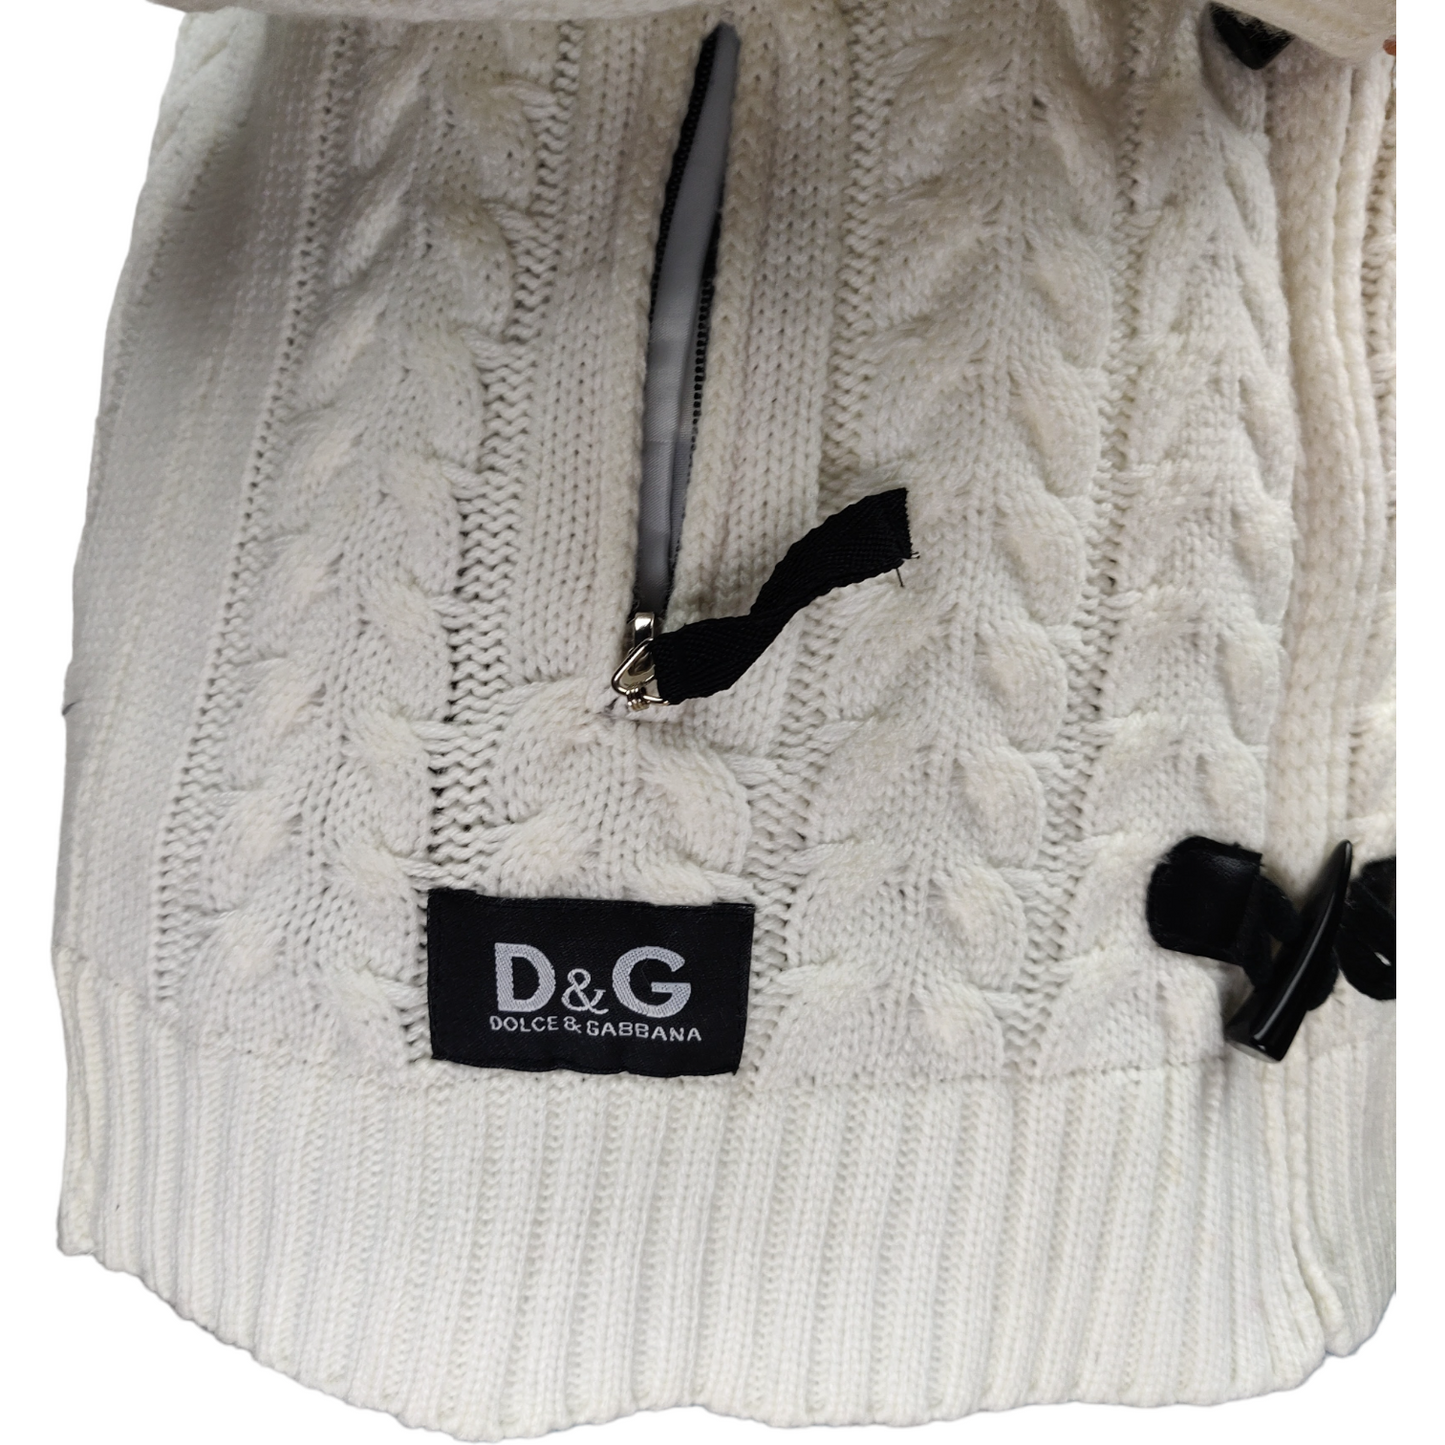 Dolce & Gabbana White Cable Knit Fleece Lined Full-Zip Hoodie Women Size Large